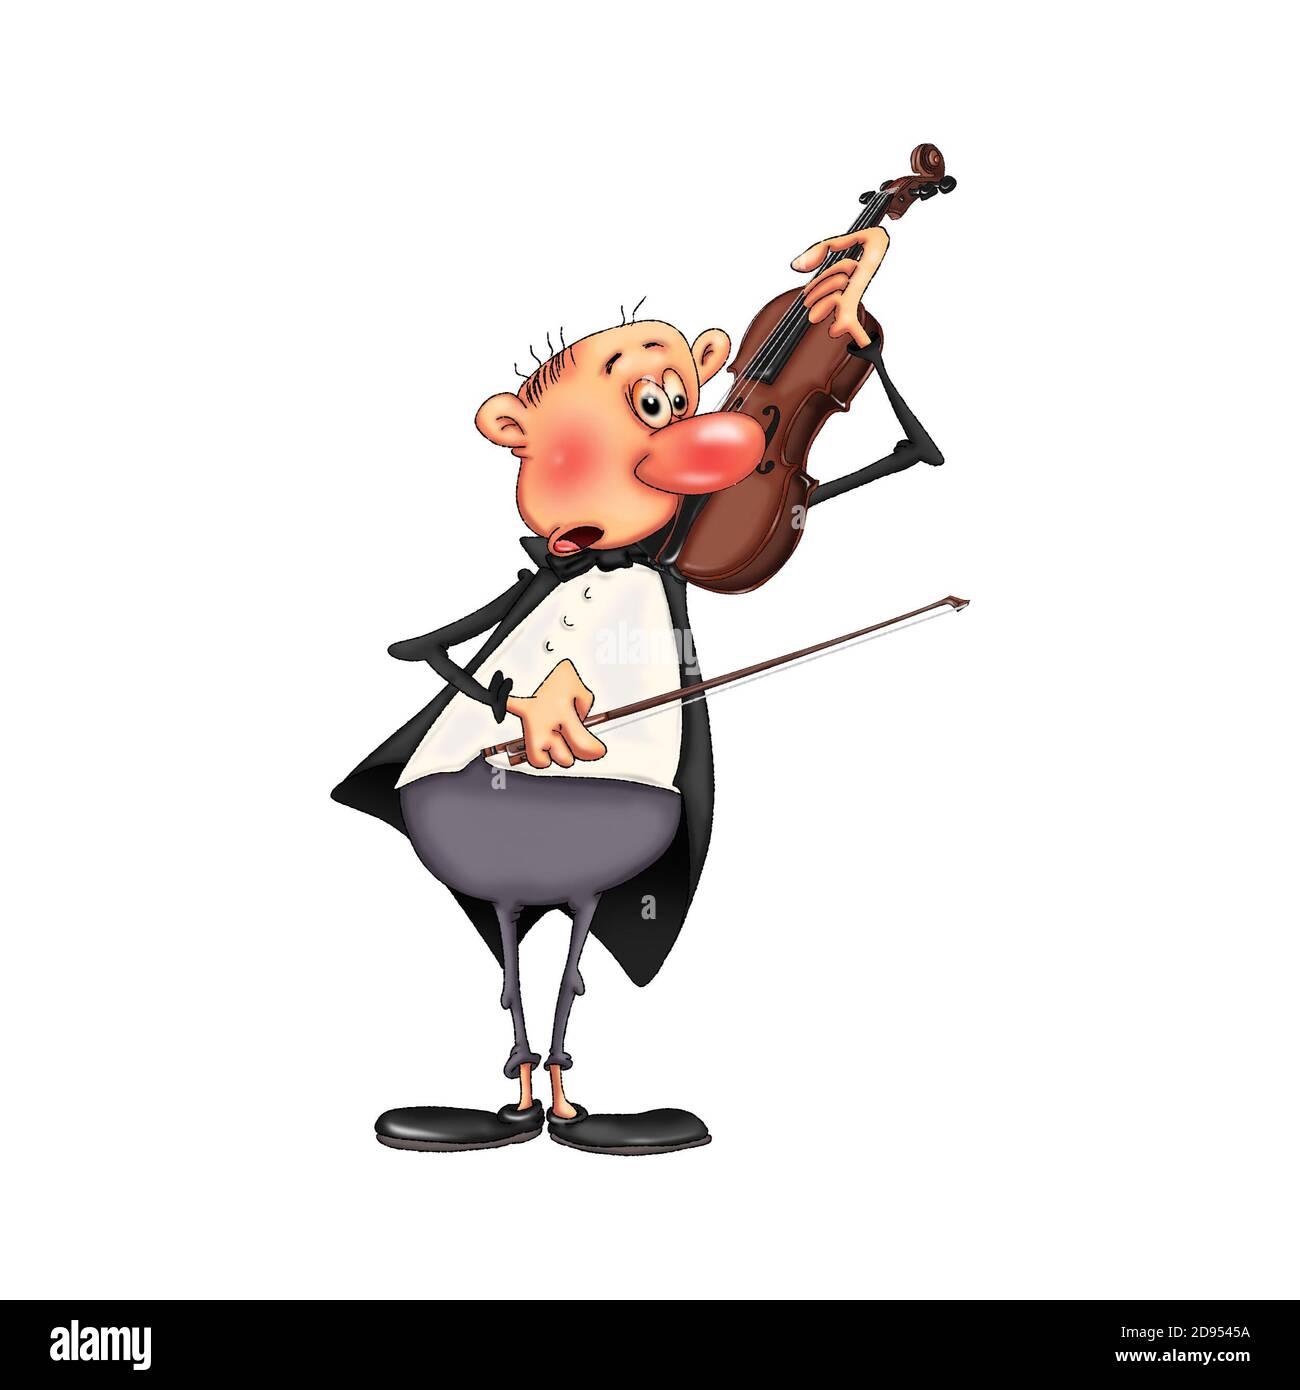 The musician plays the violin. Cartoon illustration on a white background.. Stock Photo